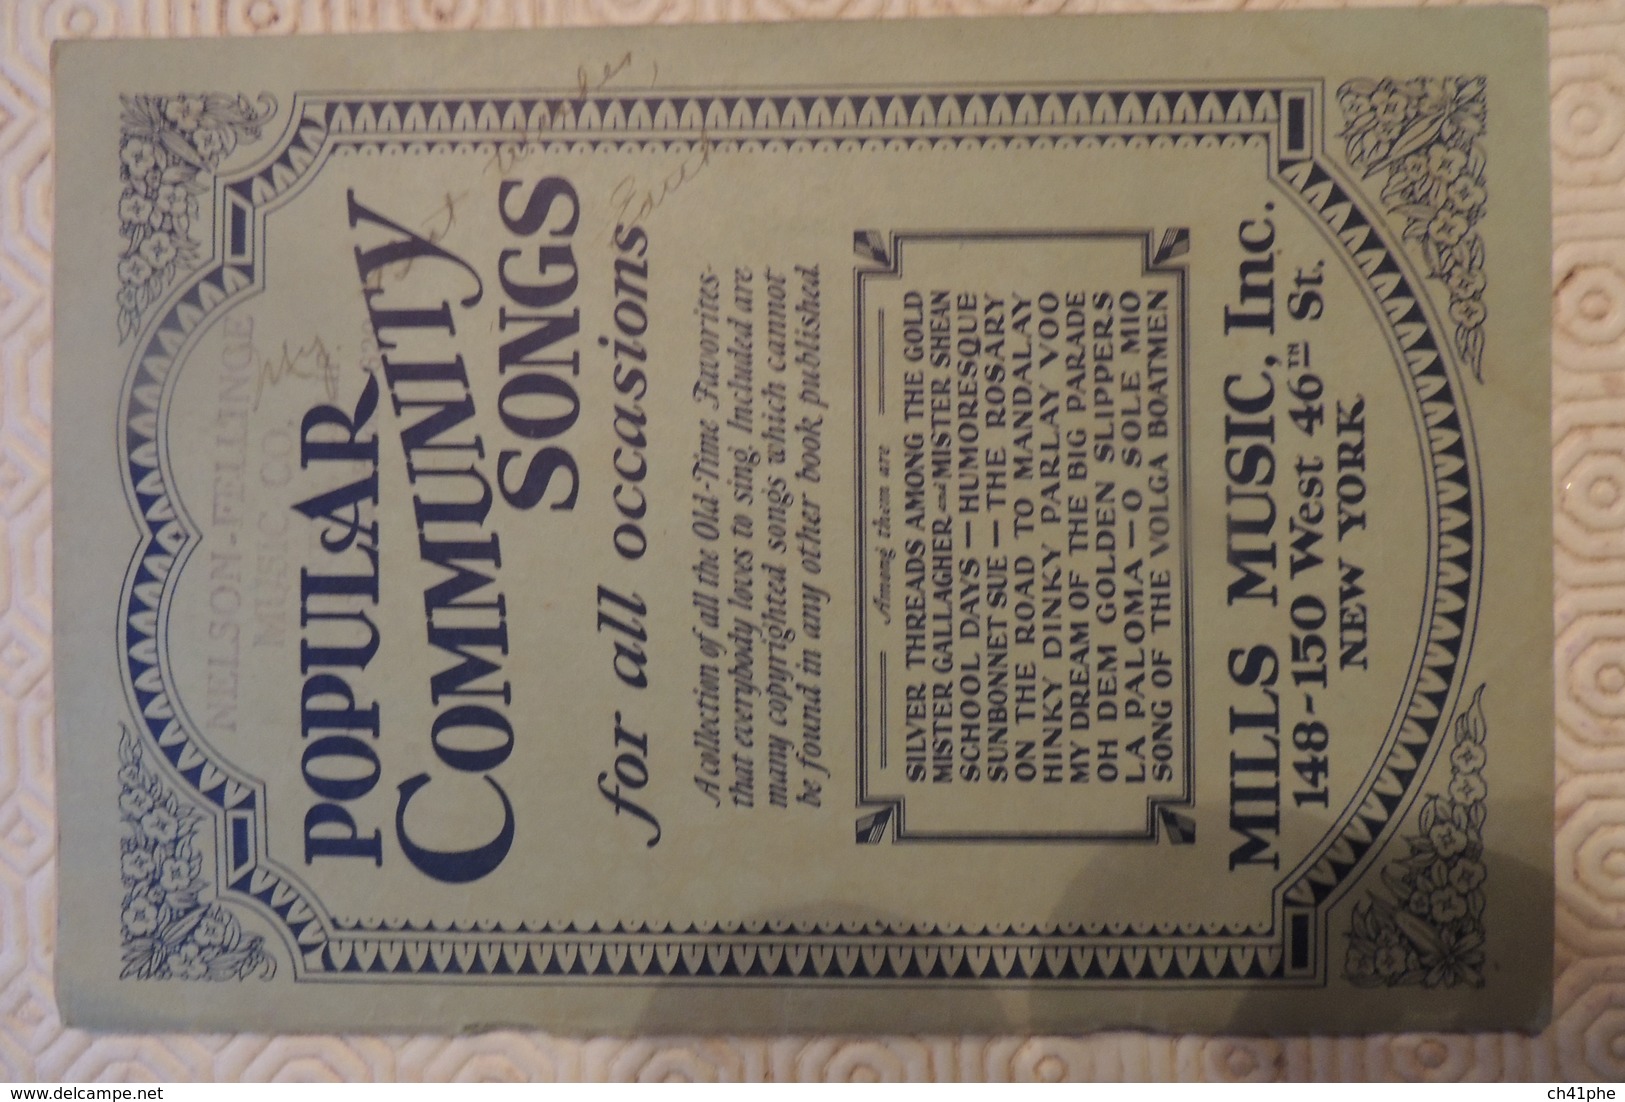 POPULAR COMMUNITY SONG FOR ALL OCCASIONS / MILLS MUSIC NEW YORK / 72 PAGES / 1920 - 1930 - Cultural